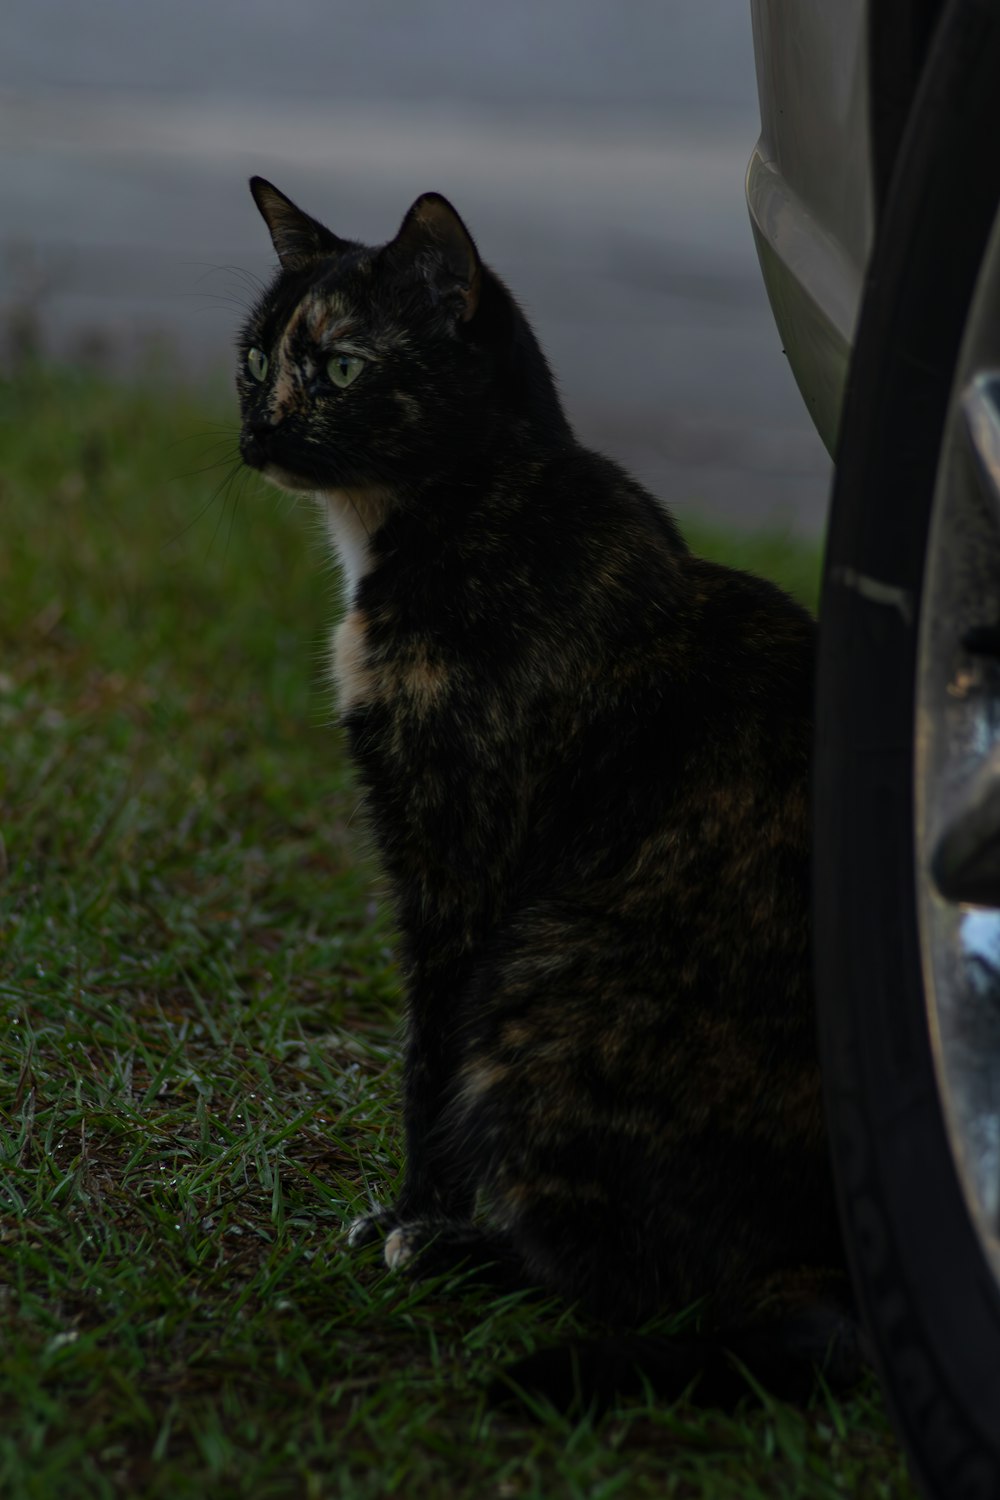 a cat sitting next to a car on the grass